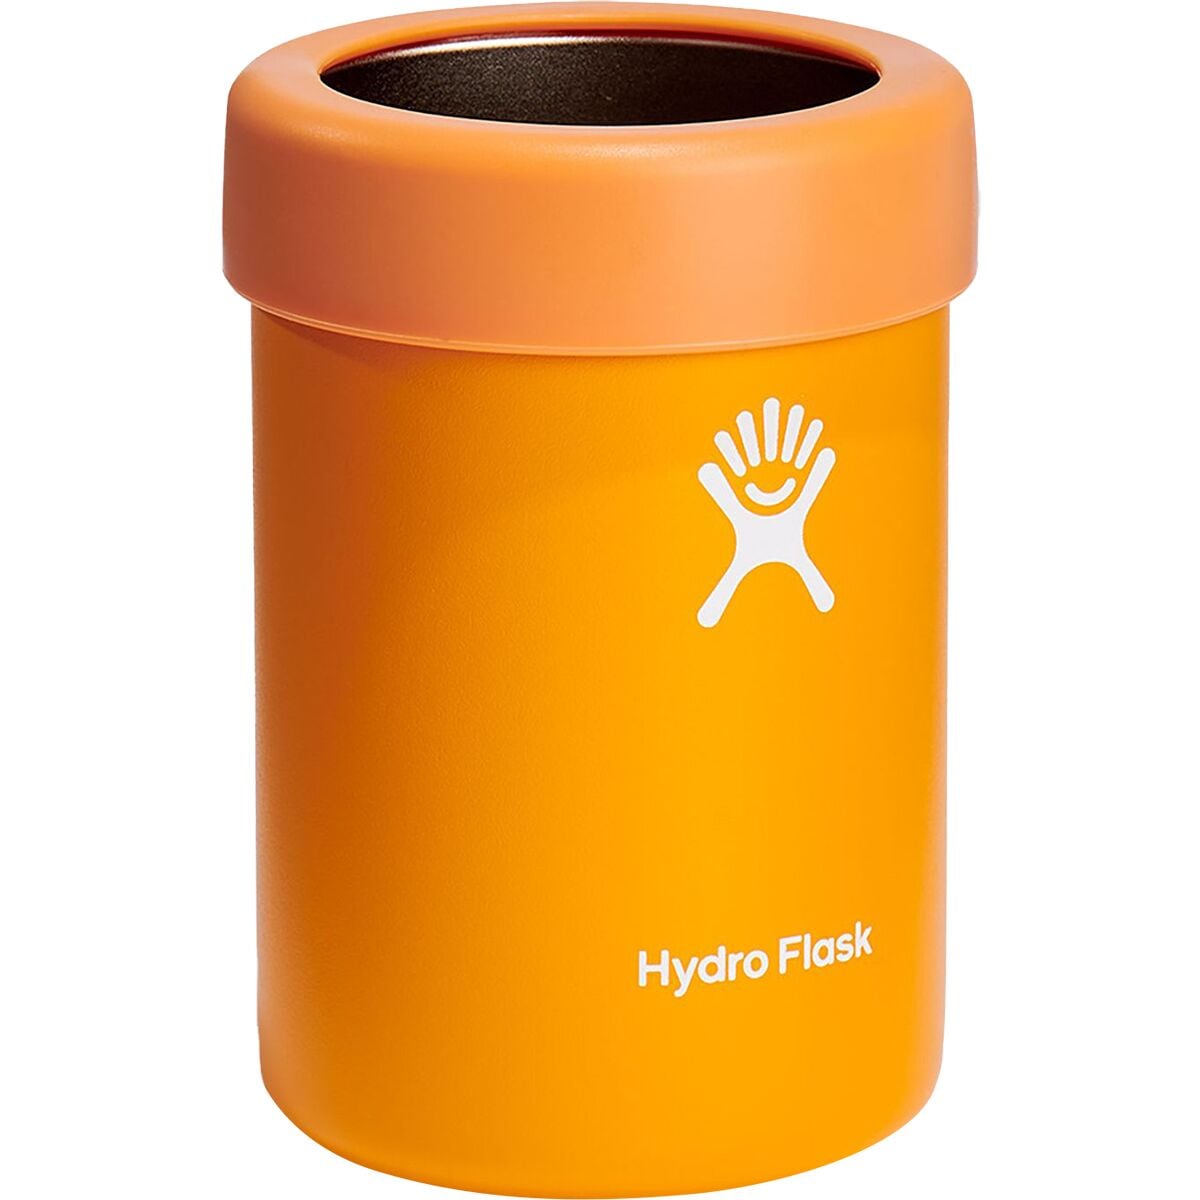 The Hydro Flask Cooler Cup is a life-saver for those hot summer picnics -  Yanko Design